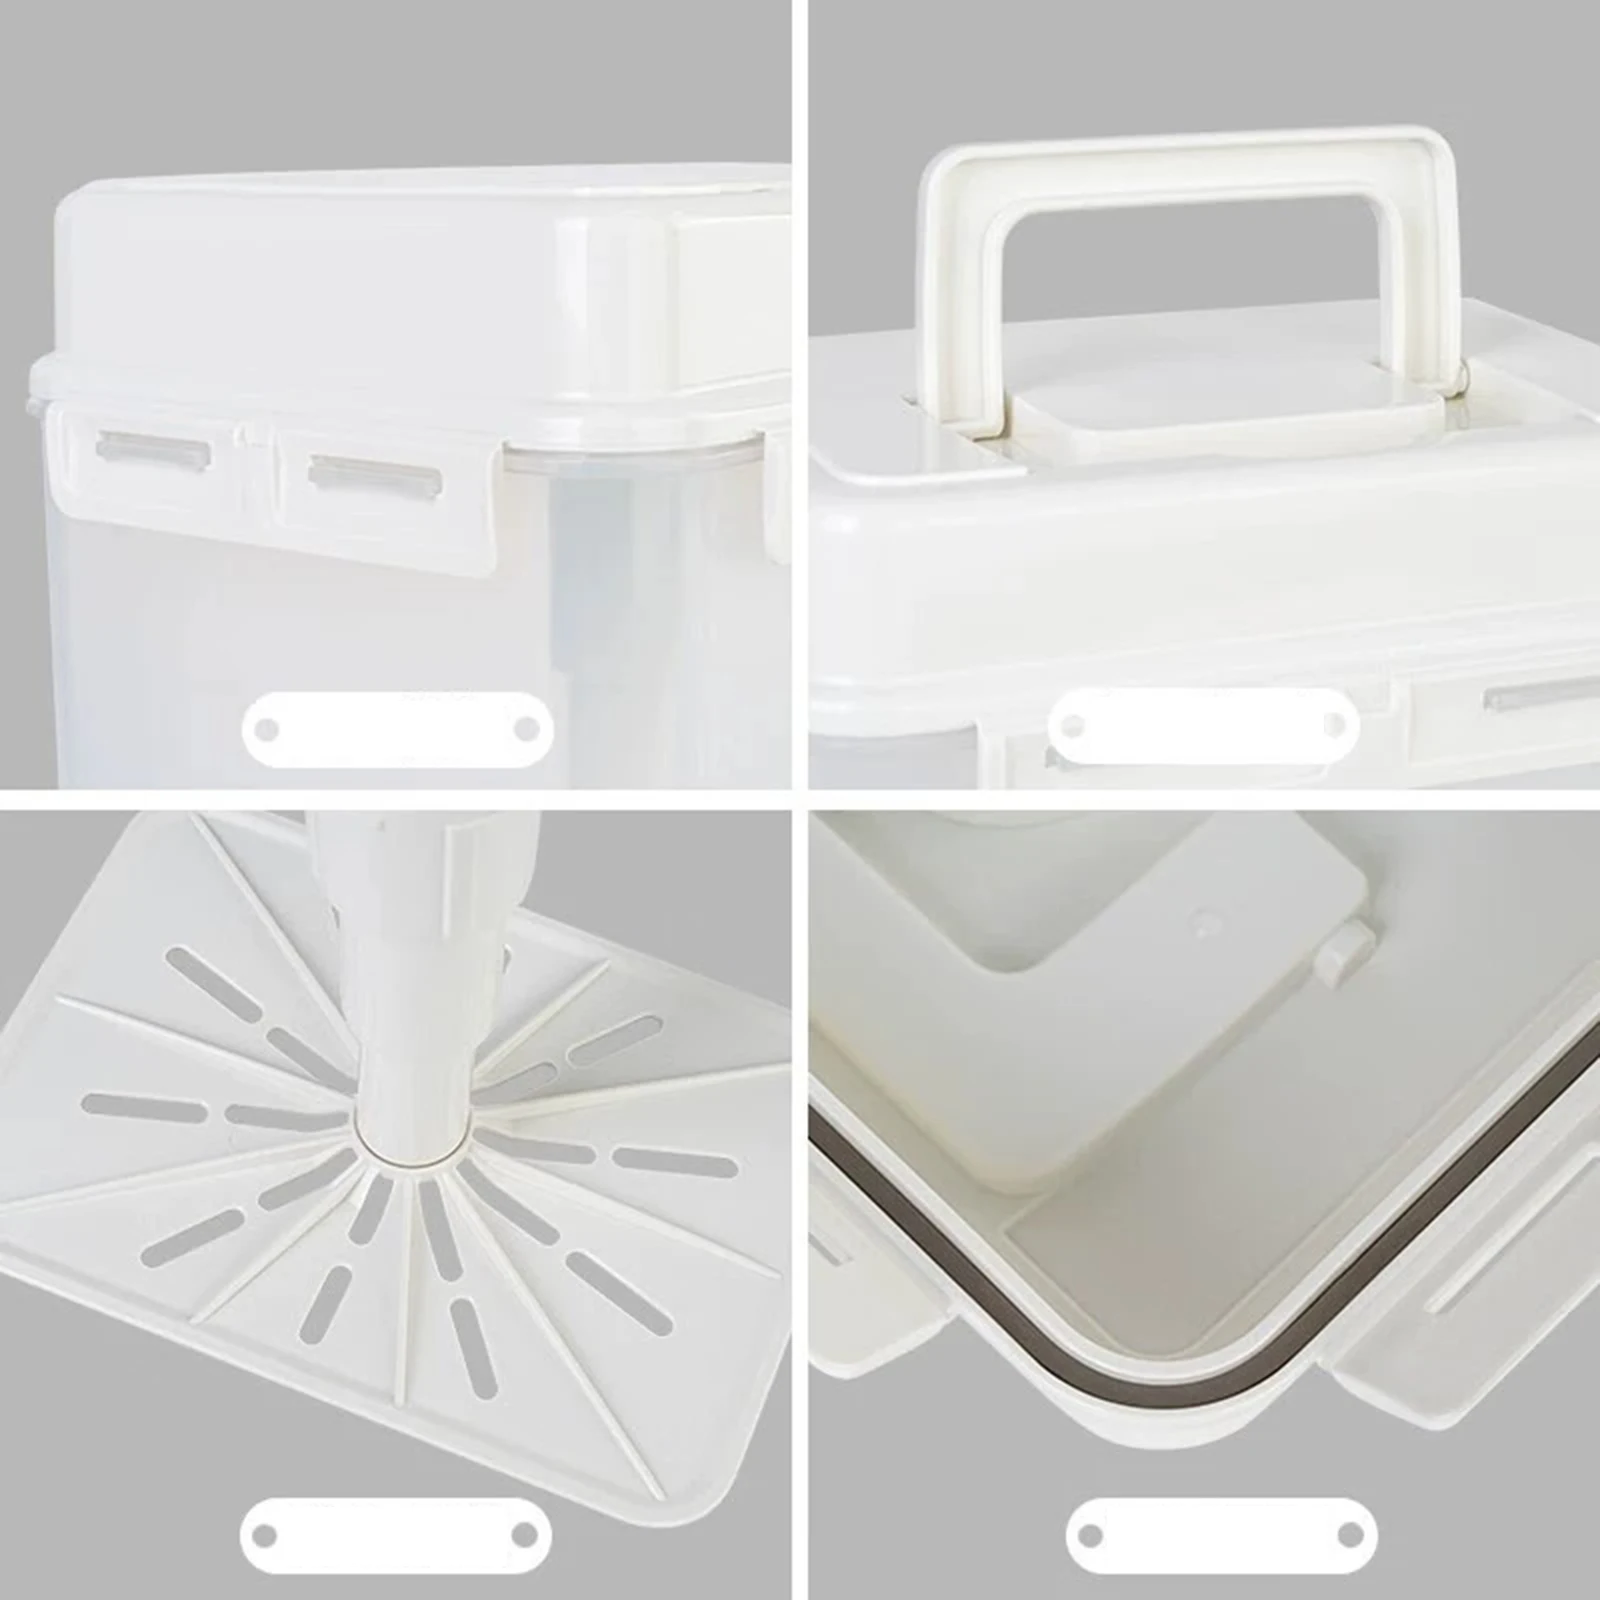 Kimchi Container Kitchen Organizer Bins with Press Plate Portable Leakproof Fermentation for Work Travel Household Office Pantry